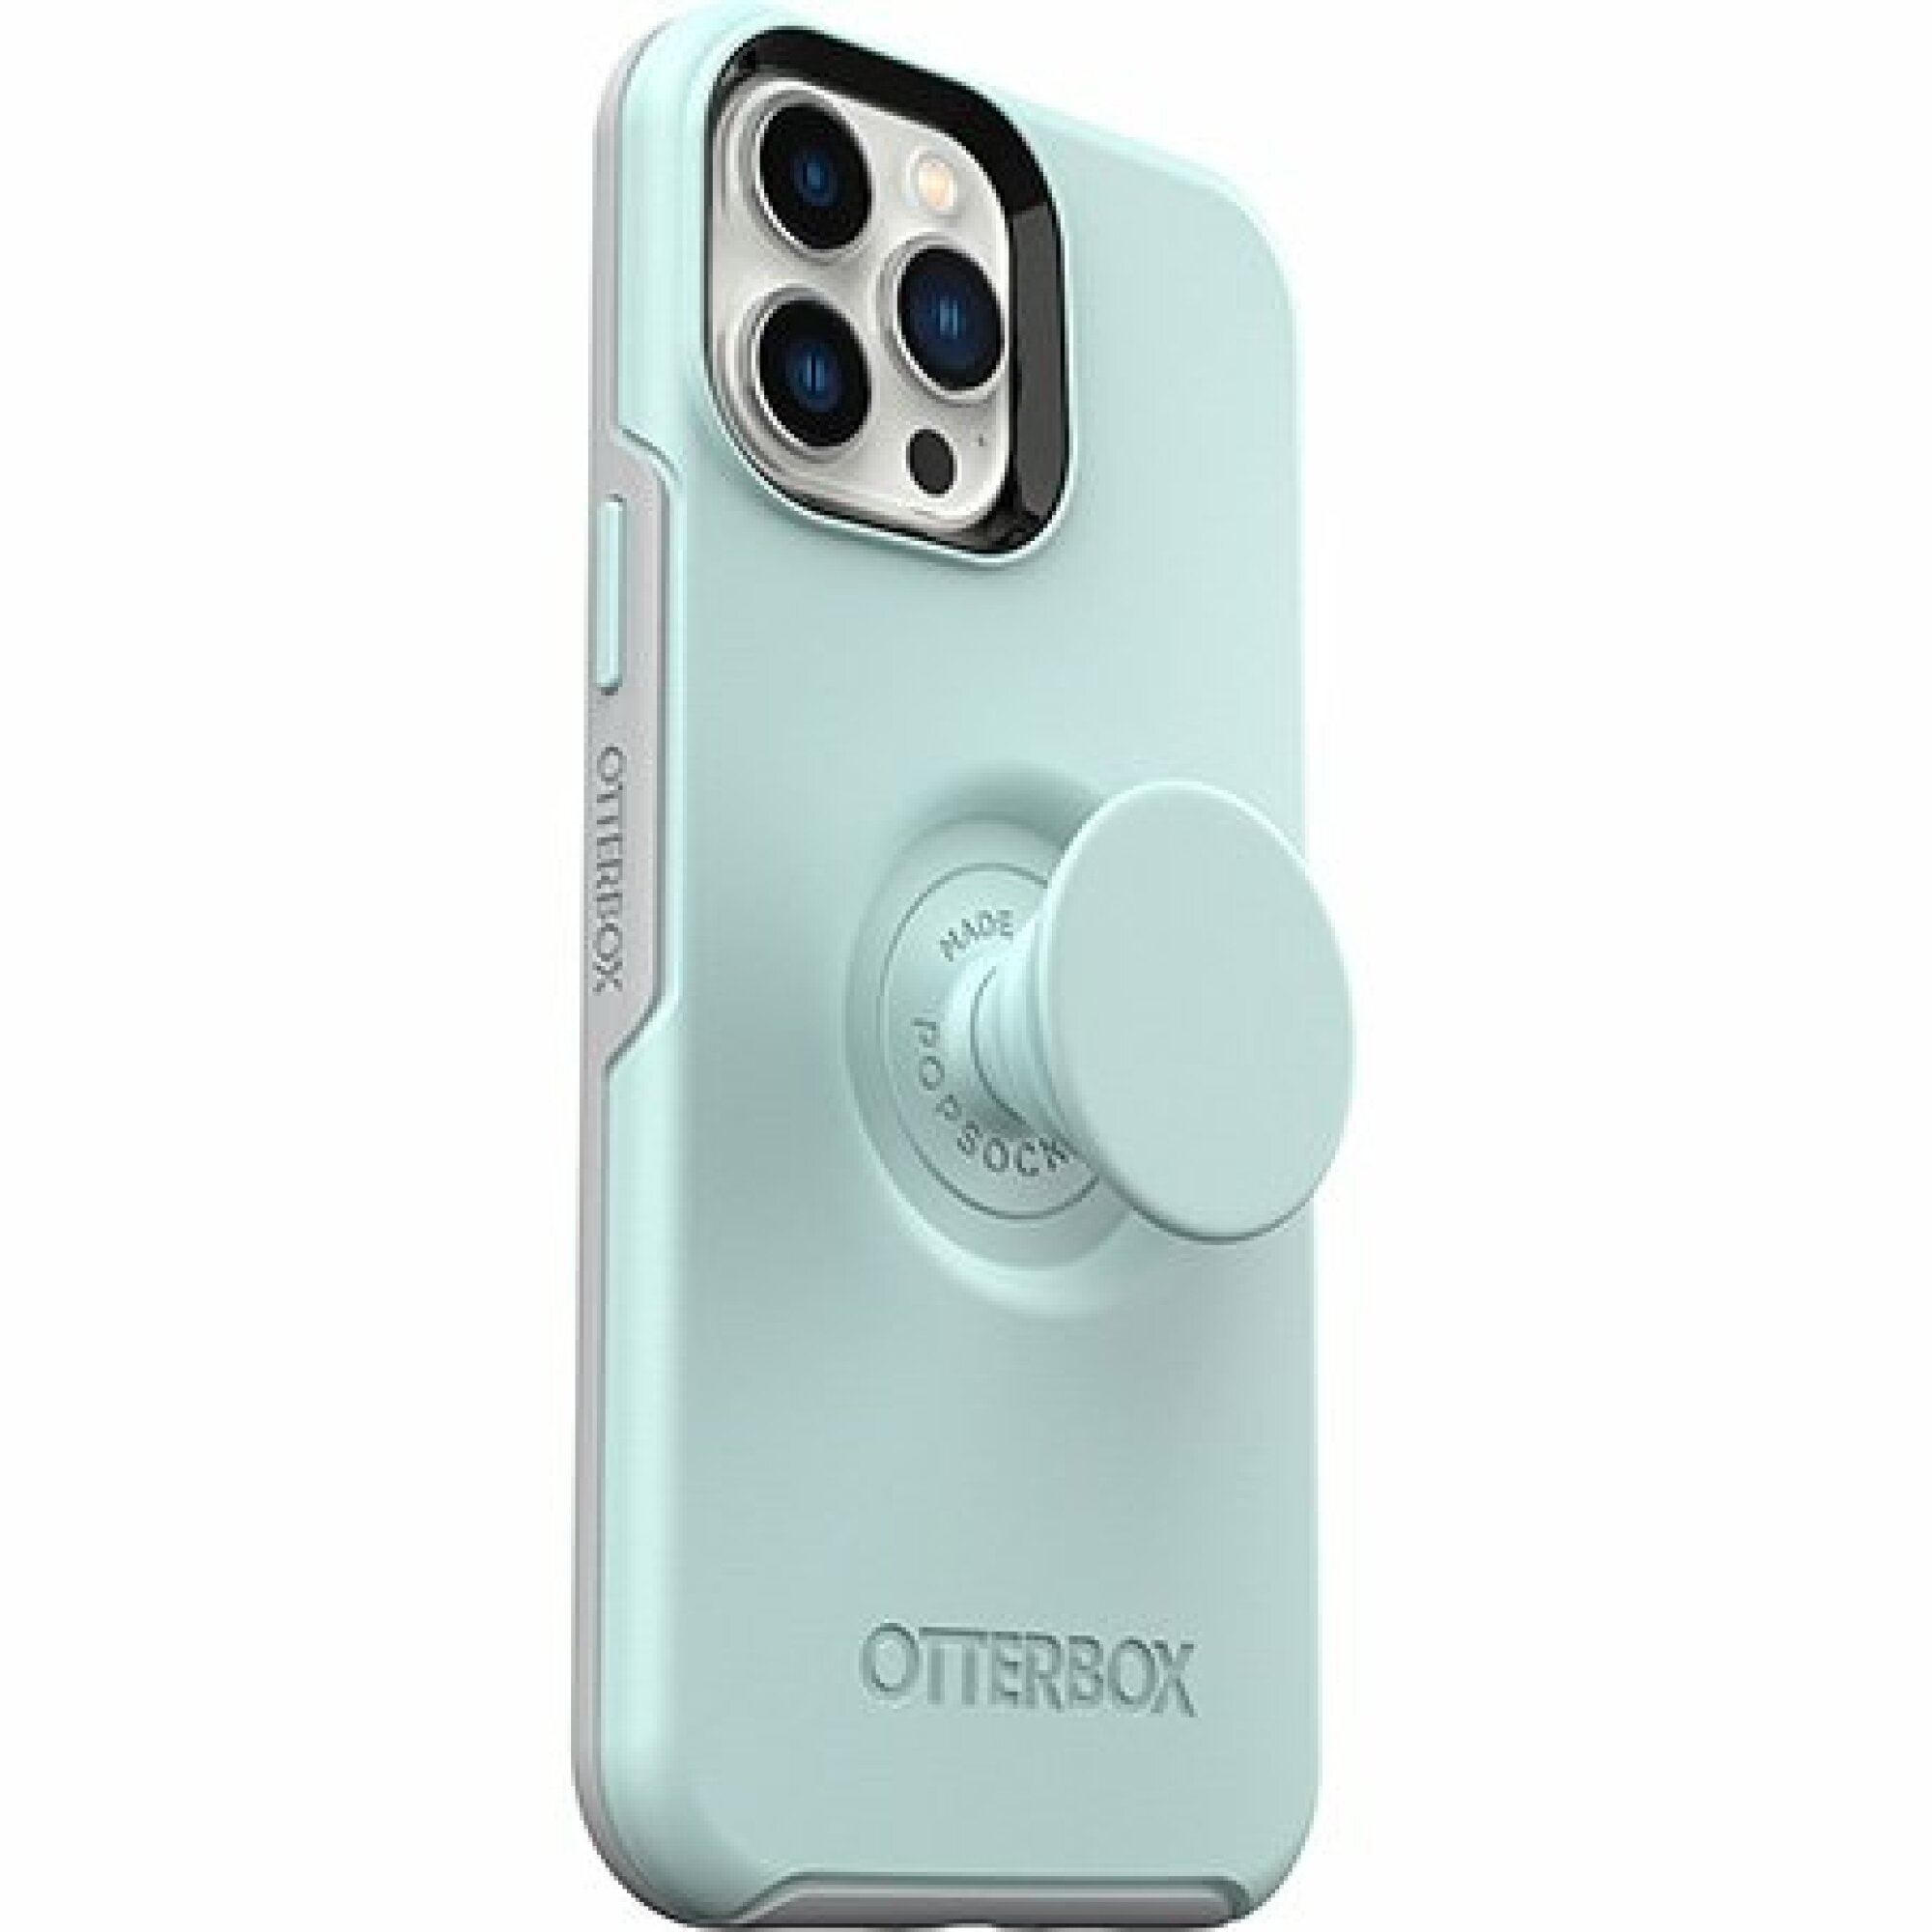 Mint colored iPhone case with attached PopSocket phone grip, shown on an iPhone